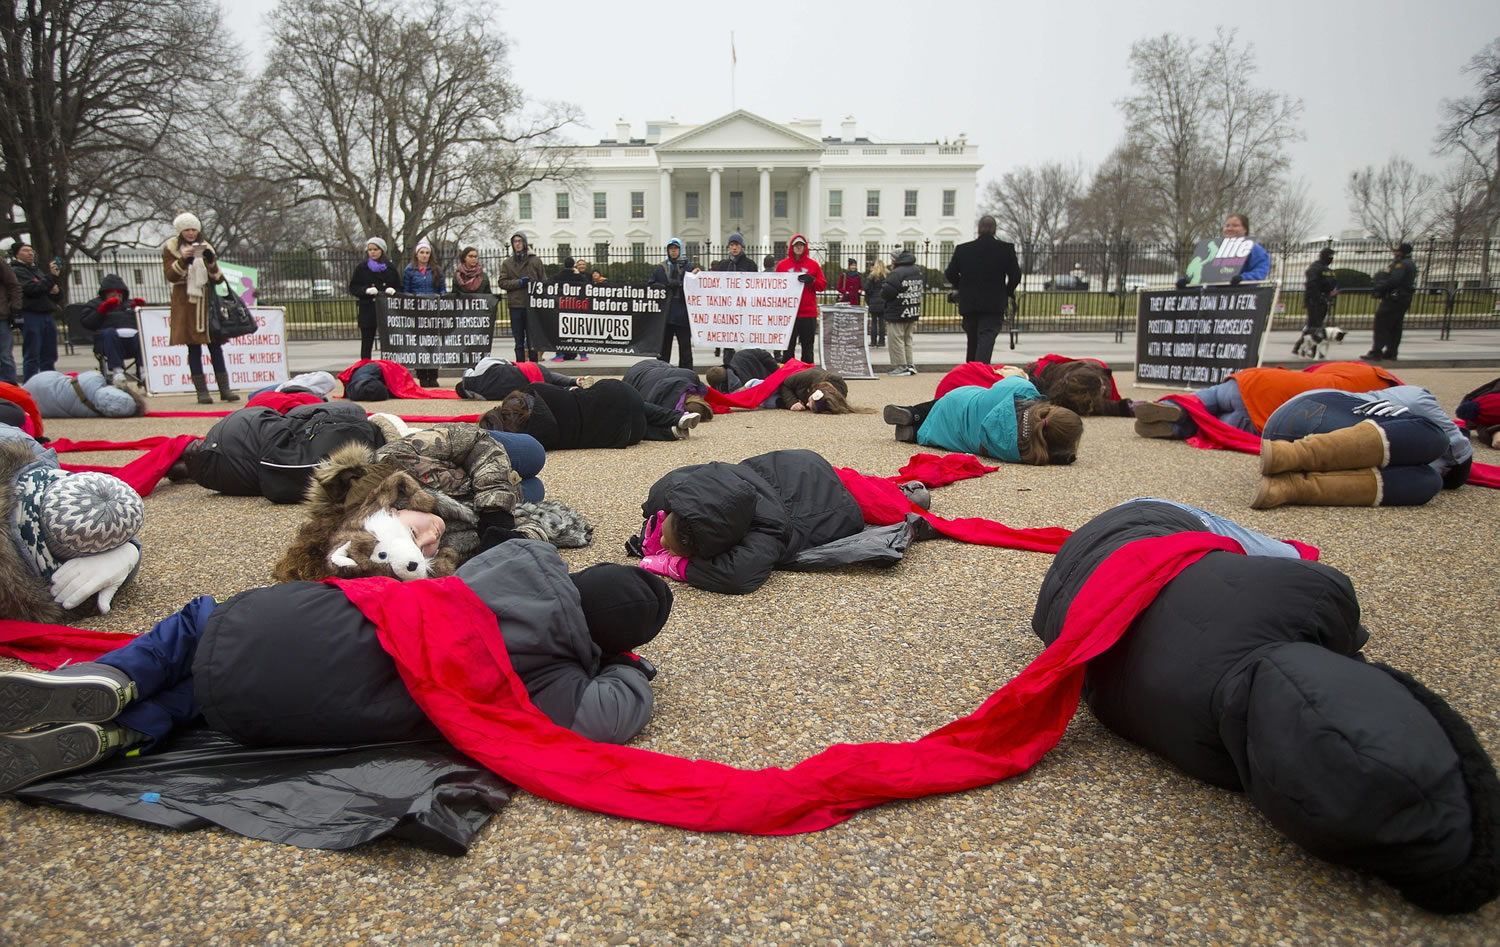 Anti-abortion activists stage a &quot;die-in&quot; in front of the White House on Wednesday in Washington.